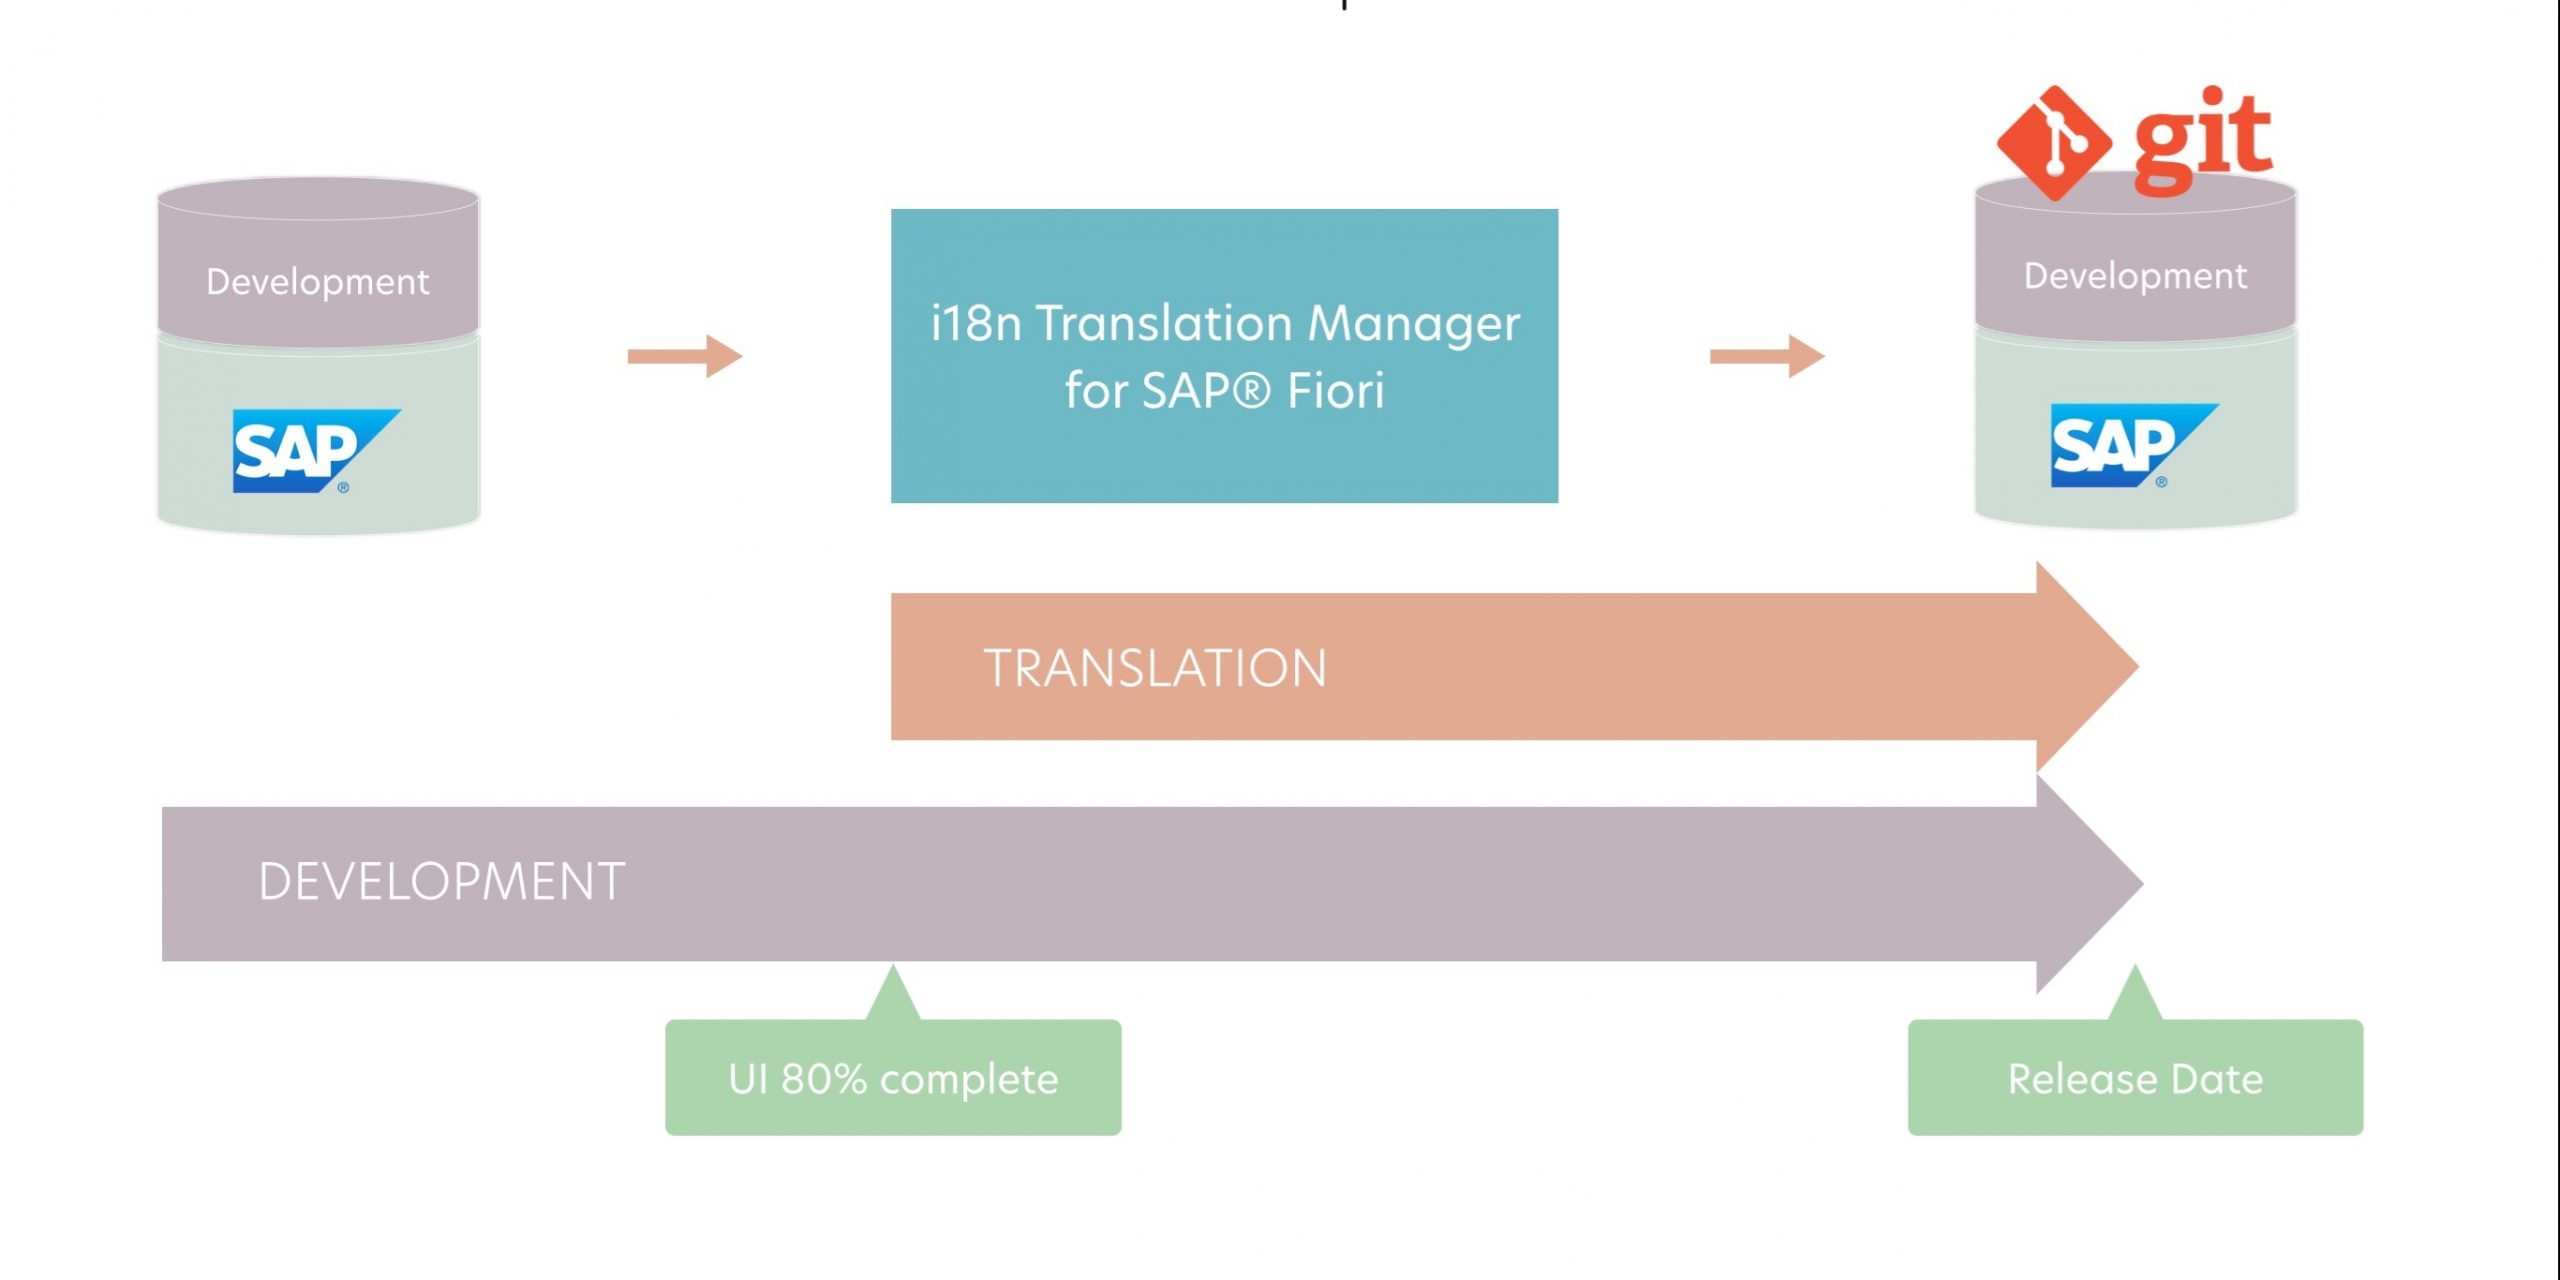 Running Translation and Development in Parallel for SAP Fiori Apps